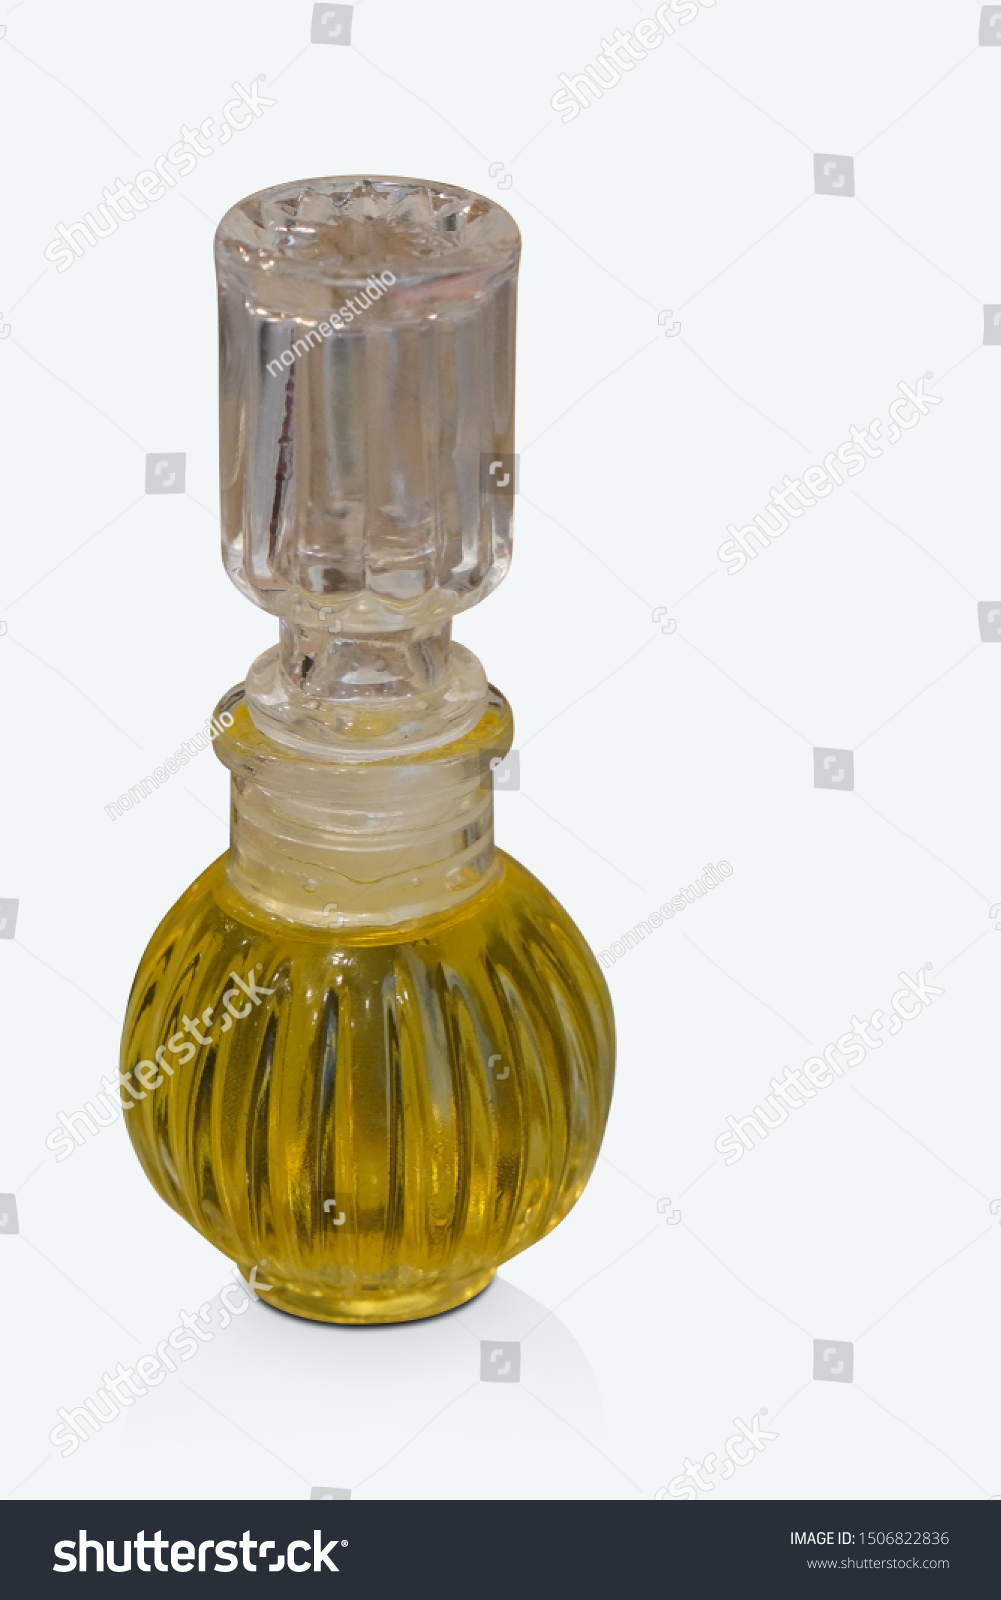 Download Di Cut Beautiful Yellow Oil Glass Stock Photo Edit Now 1506822836 Yellowimages Mockups